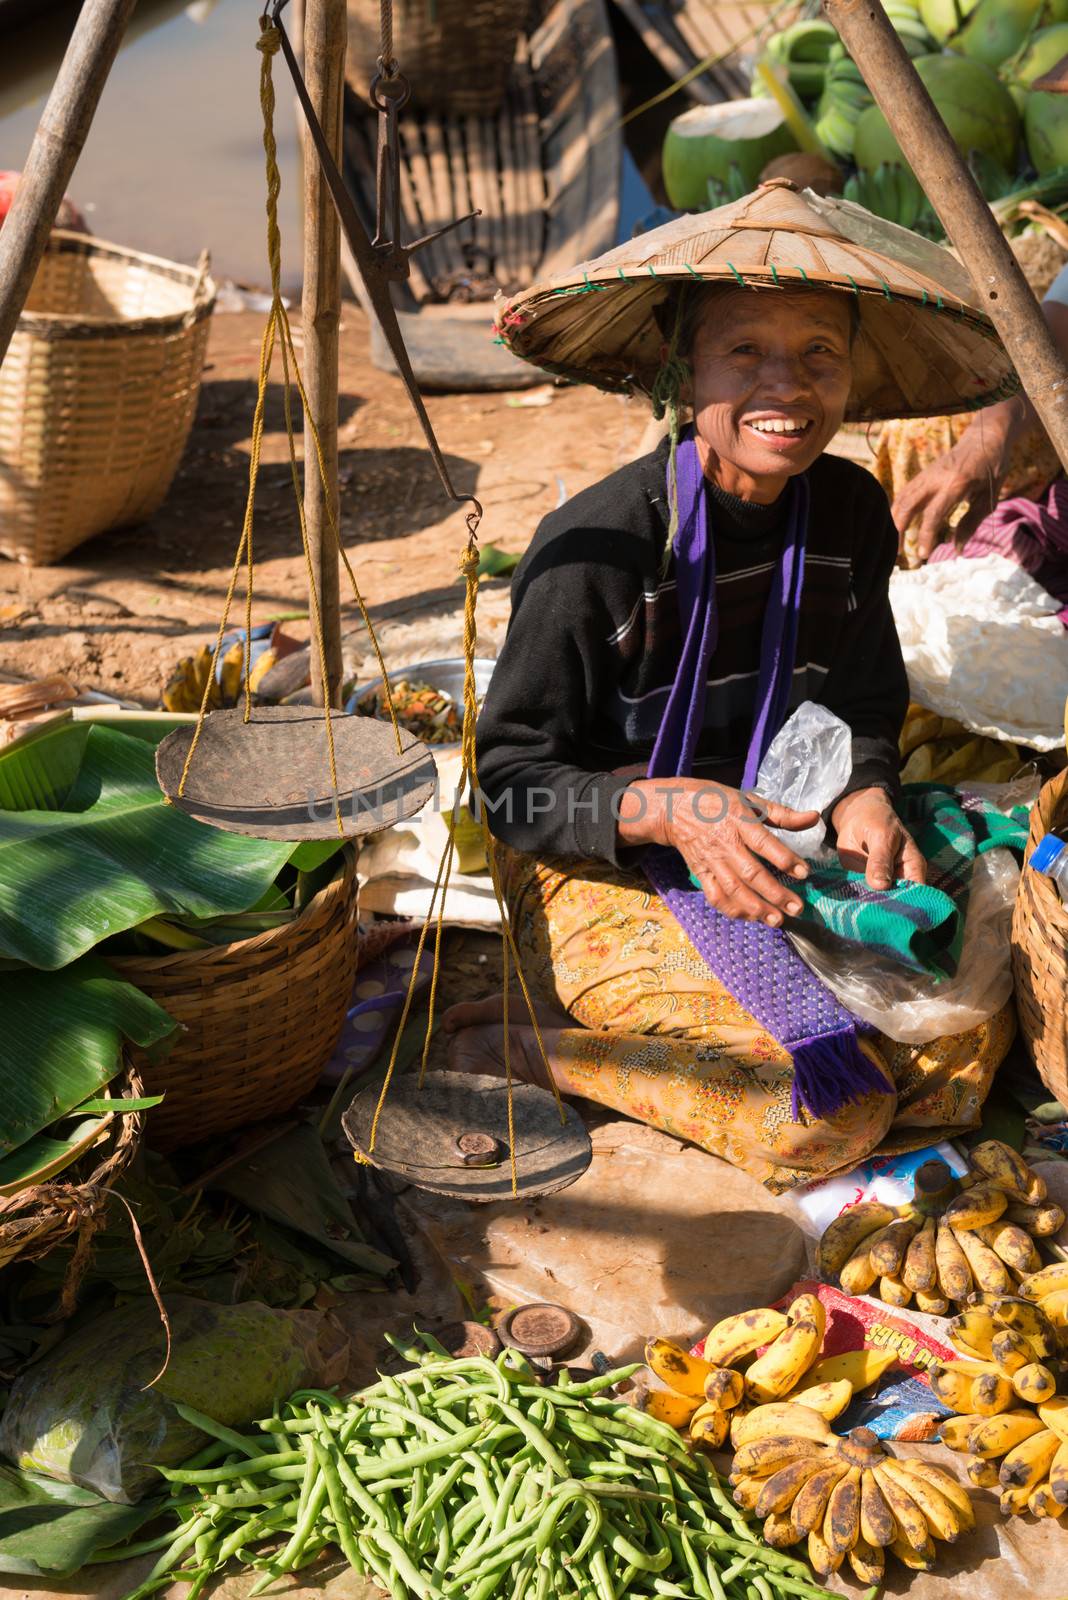 INLE LAKE, MYANMAR (BURMA) - 07 JAN 2014: Local Burmese Intha woman sell vegetable on a traditional open market. Local markets serves most common shopping needs Inle Lake people.